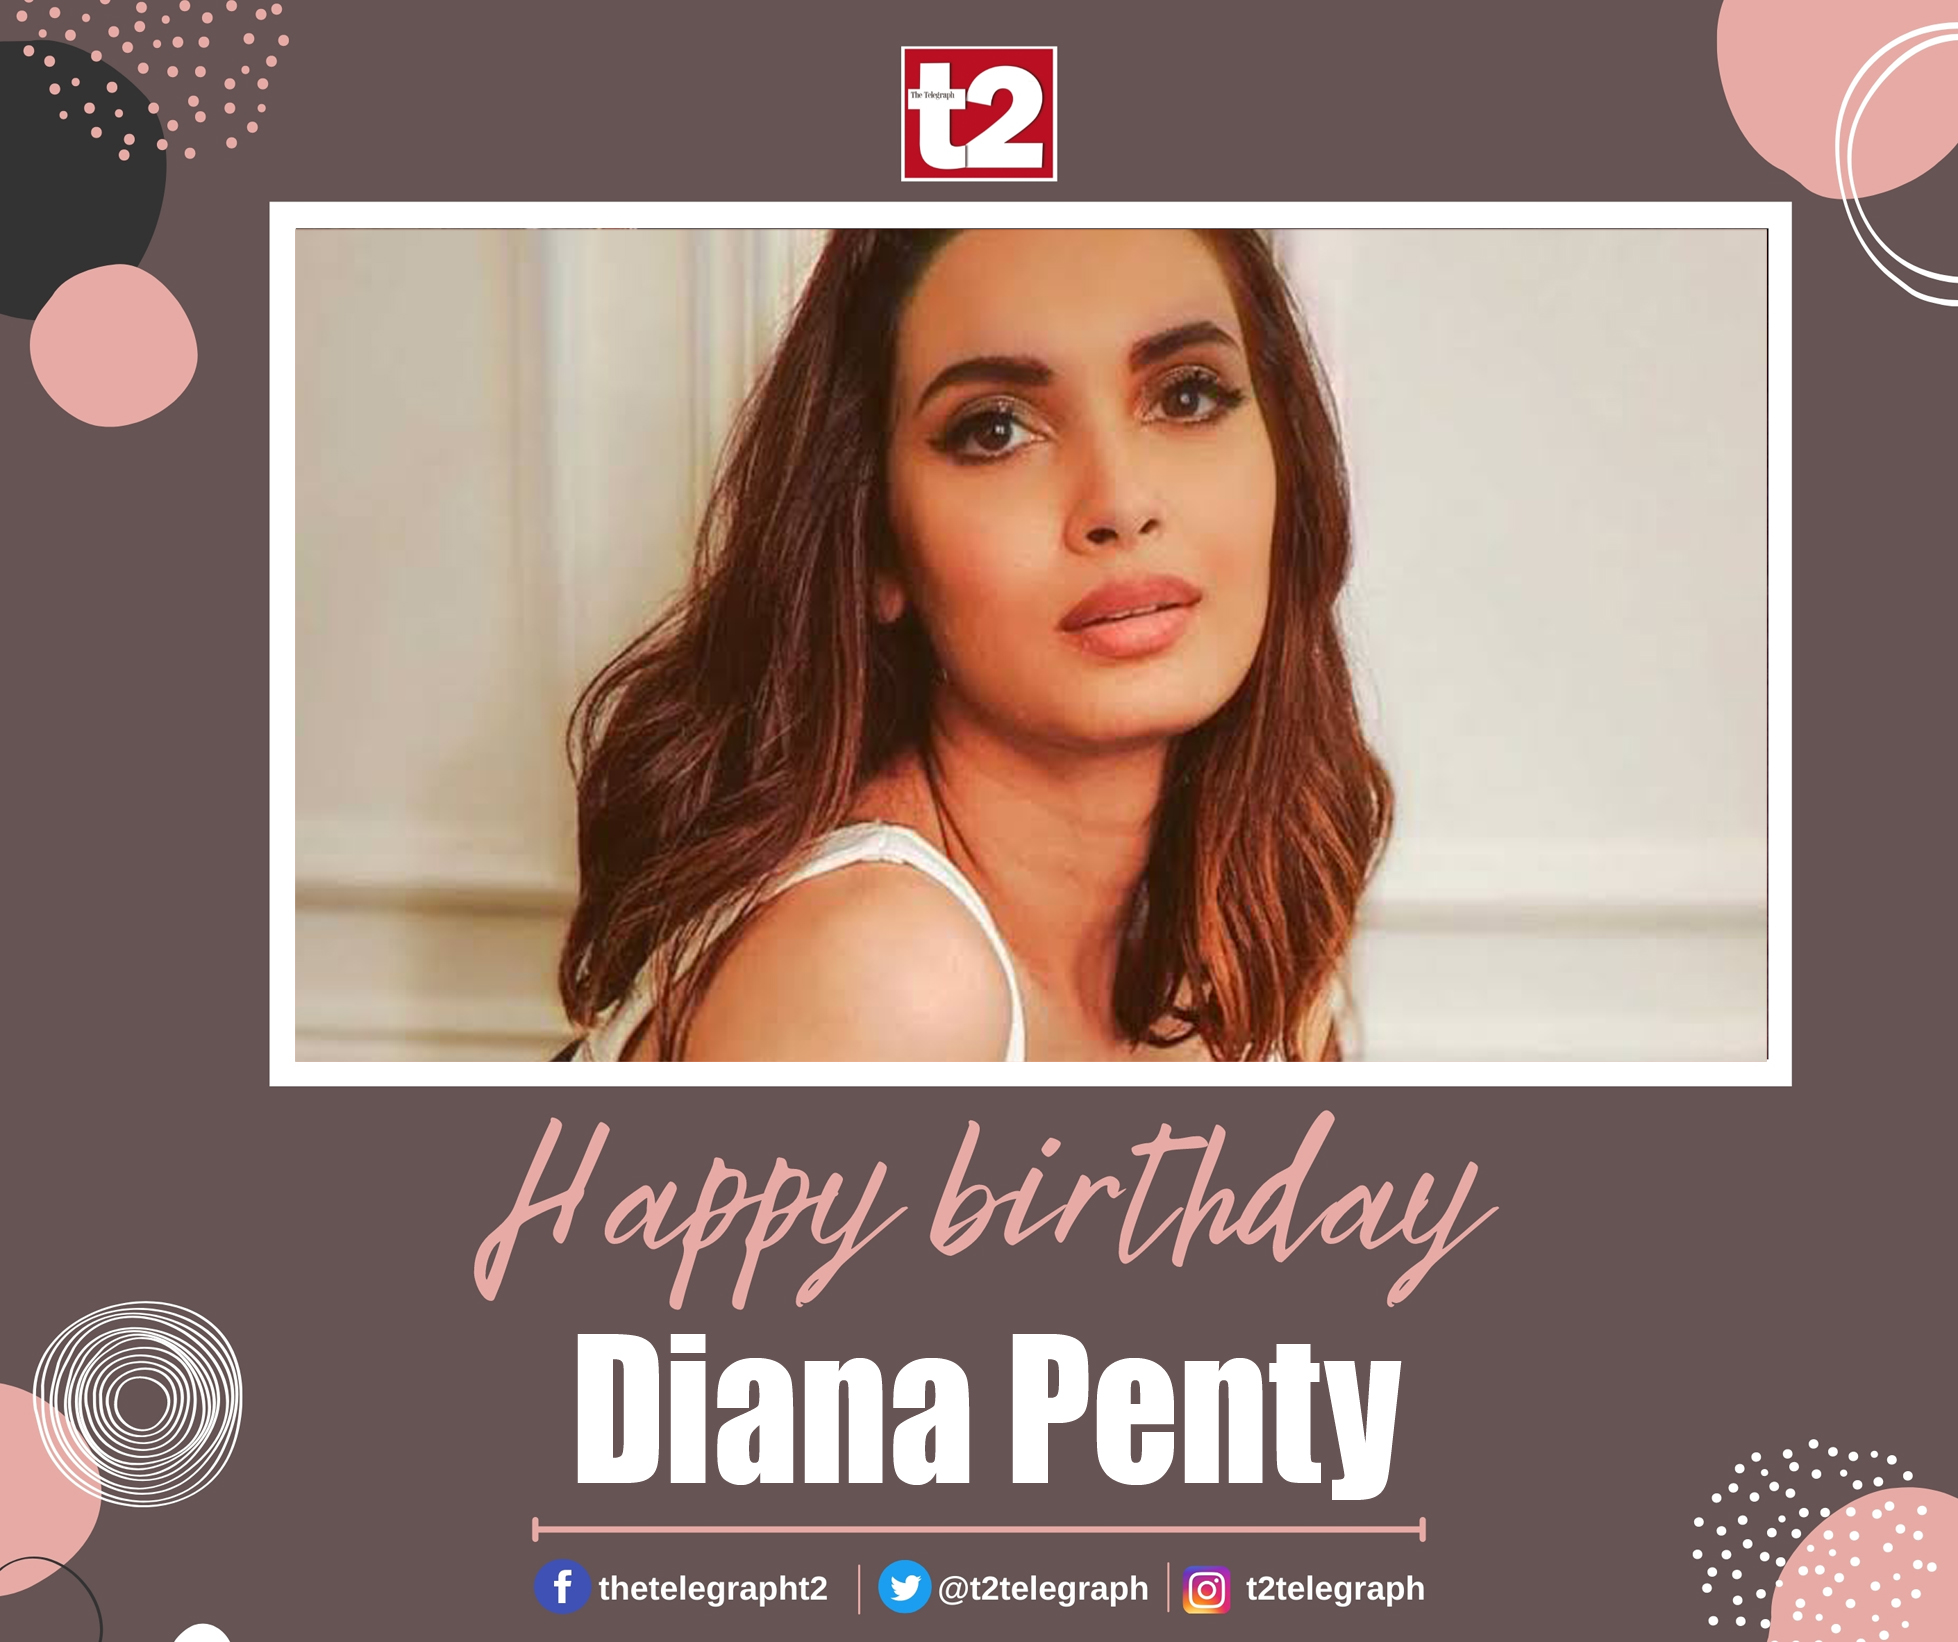 Team t2 wishes the simple and striking, fresh and fab Diana Penty a very happy birthday 